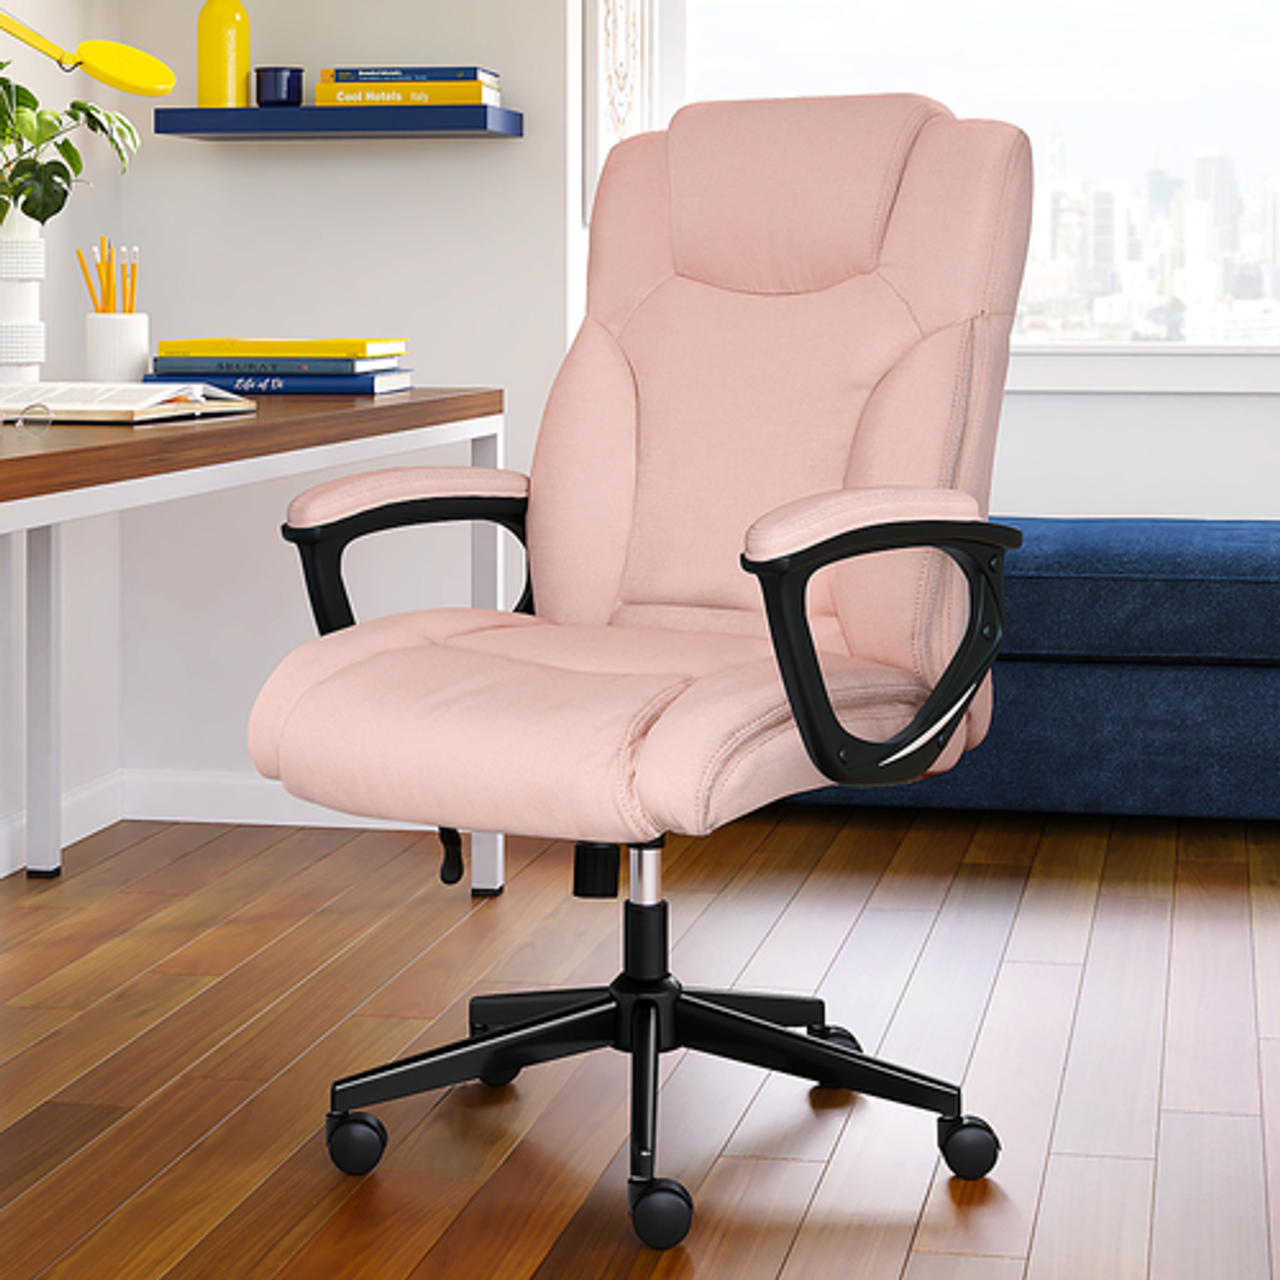 Serta - Connor Upholstered Executive High-Back Office Chair with Lumbar Support - Microfiber - Pink